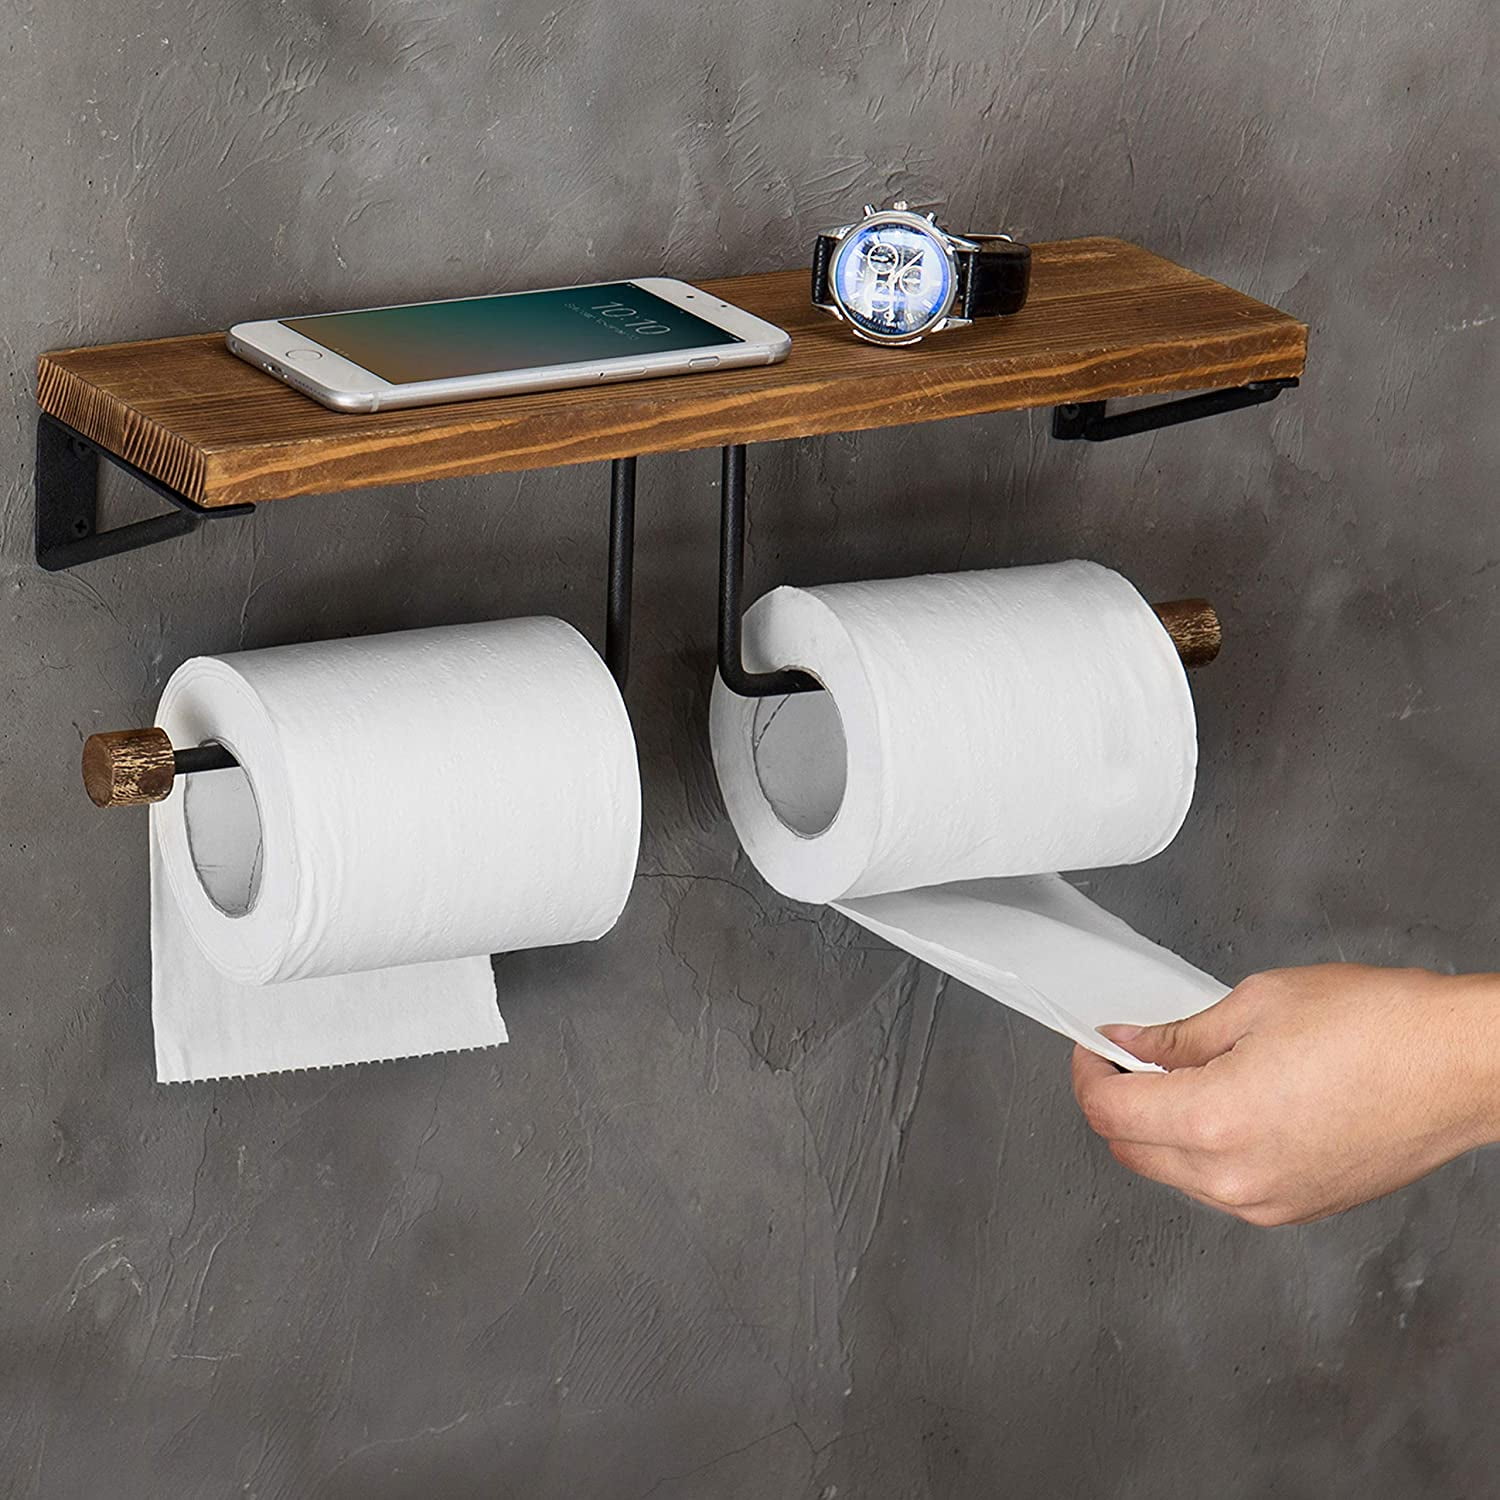 Black Wall-Mounted Industrial Pipe Paper Towel Holder – MyGift